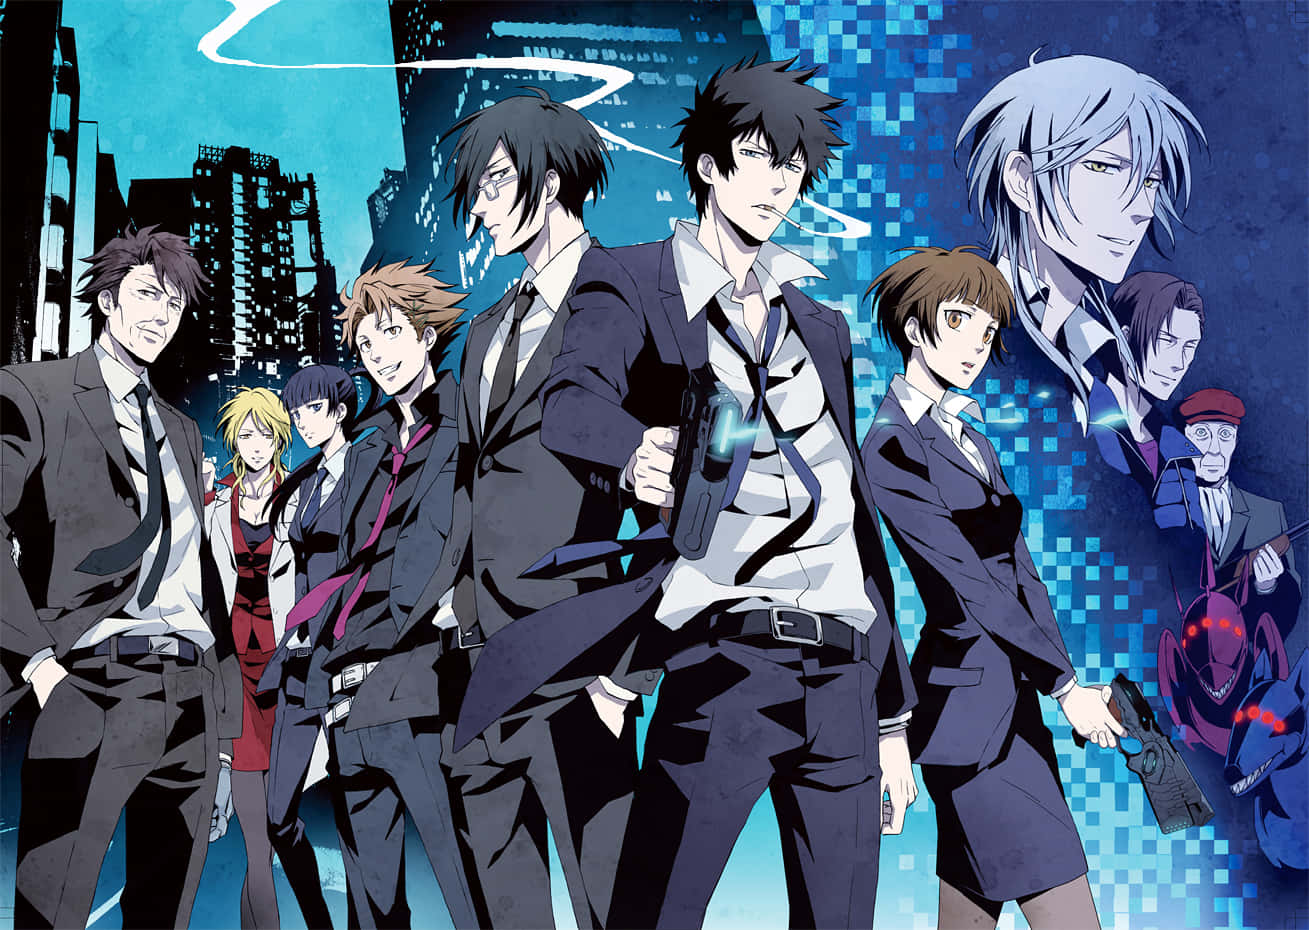 “the Balance Between Justice And Safety In Psycho Pass”